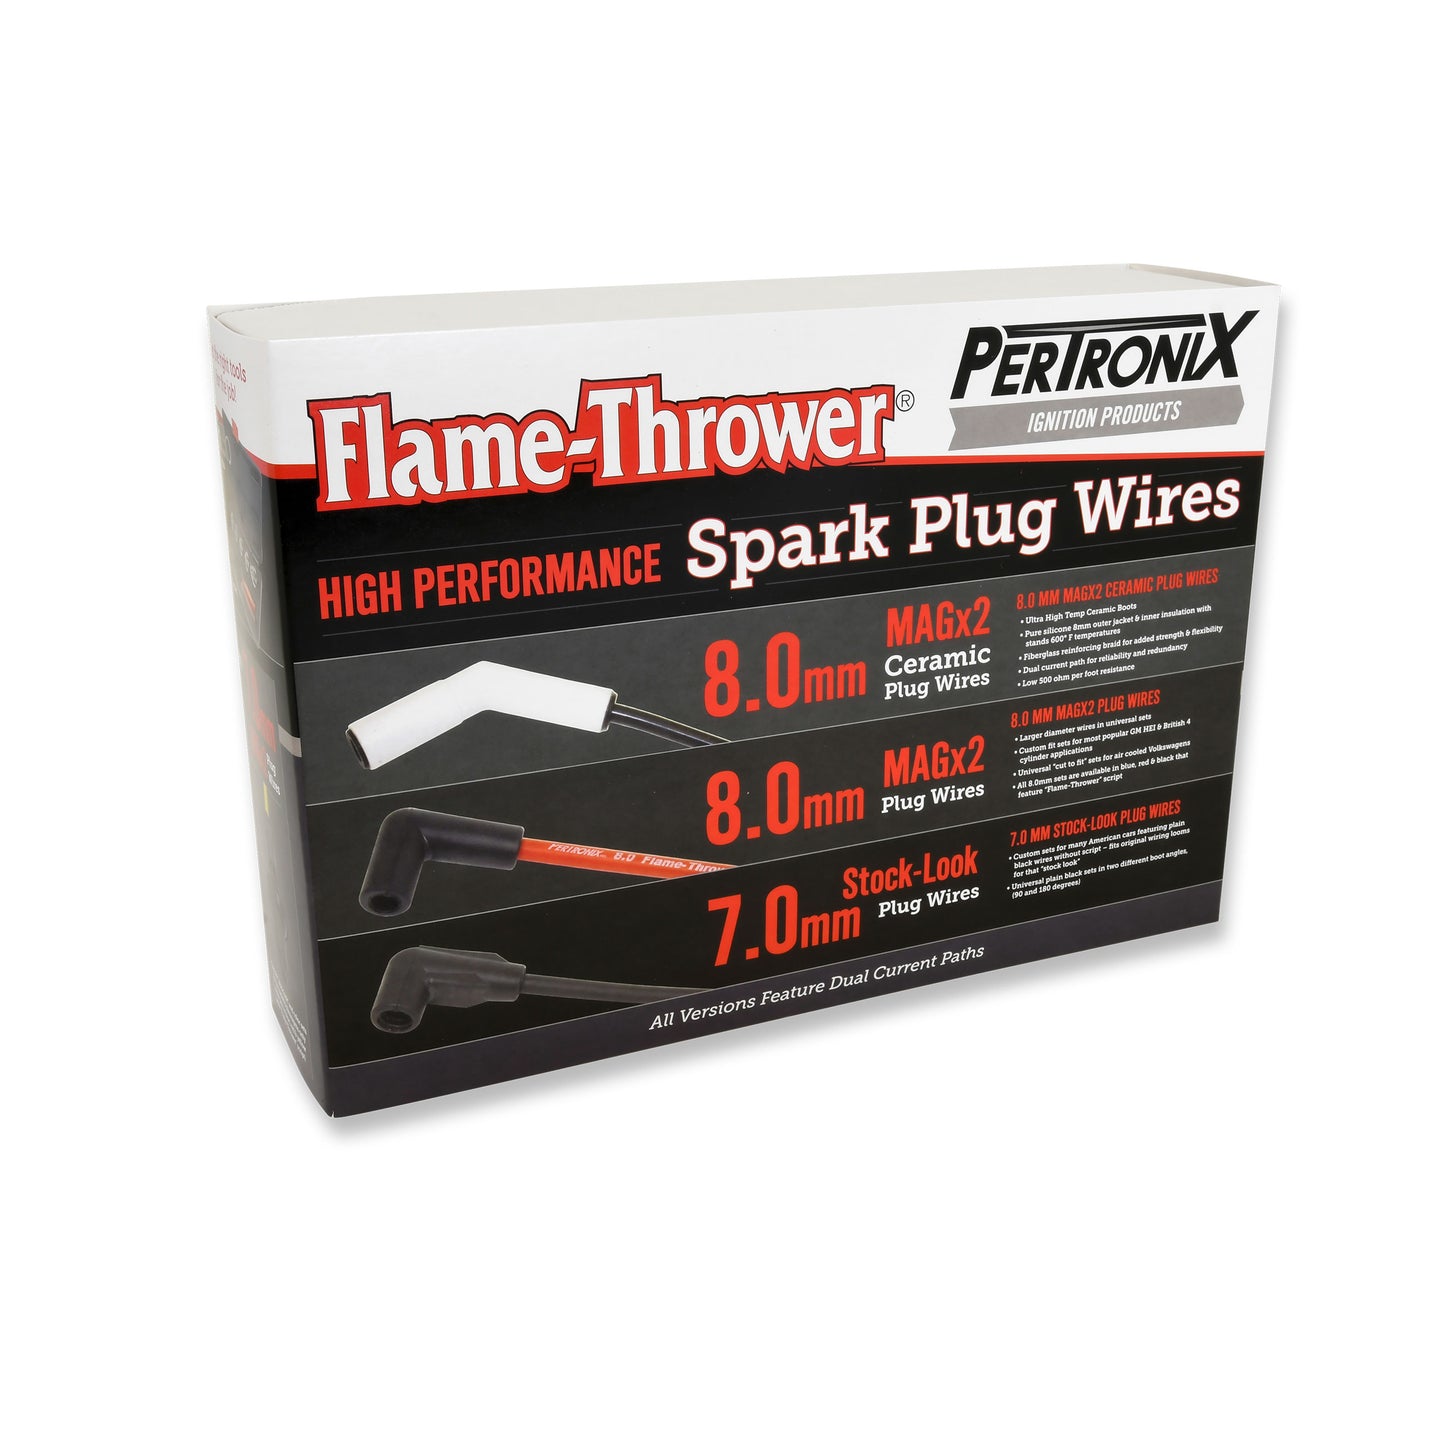 PerTronix 804280 Flame-Thrower Spark Plug Wires 4 cyl 8mm Universal 180 Degree Black